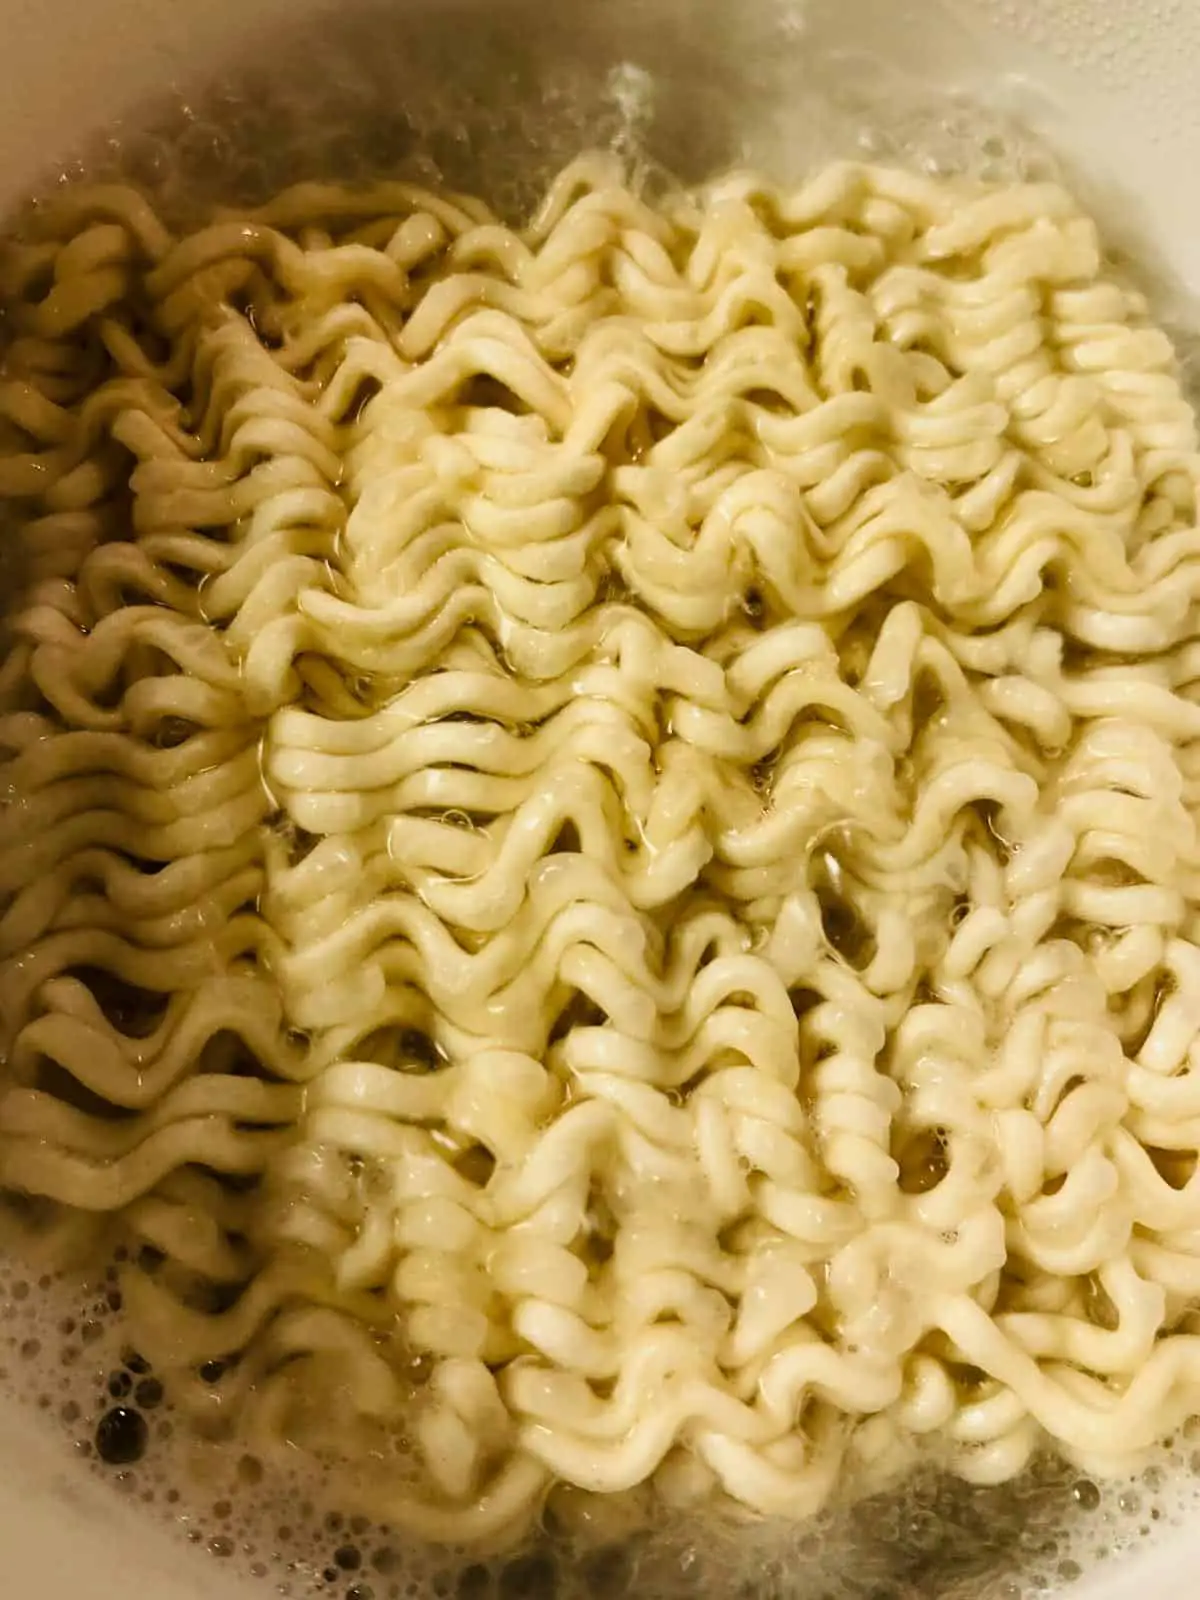 Noodles that are boiling in a kettle.